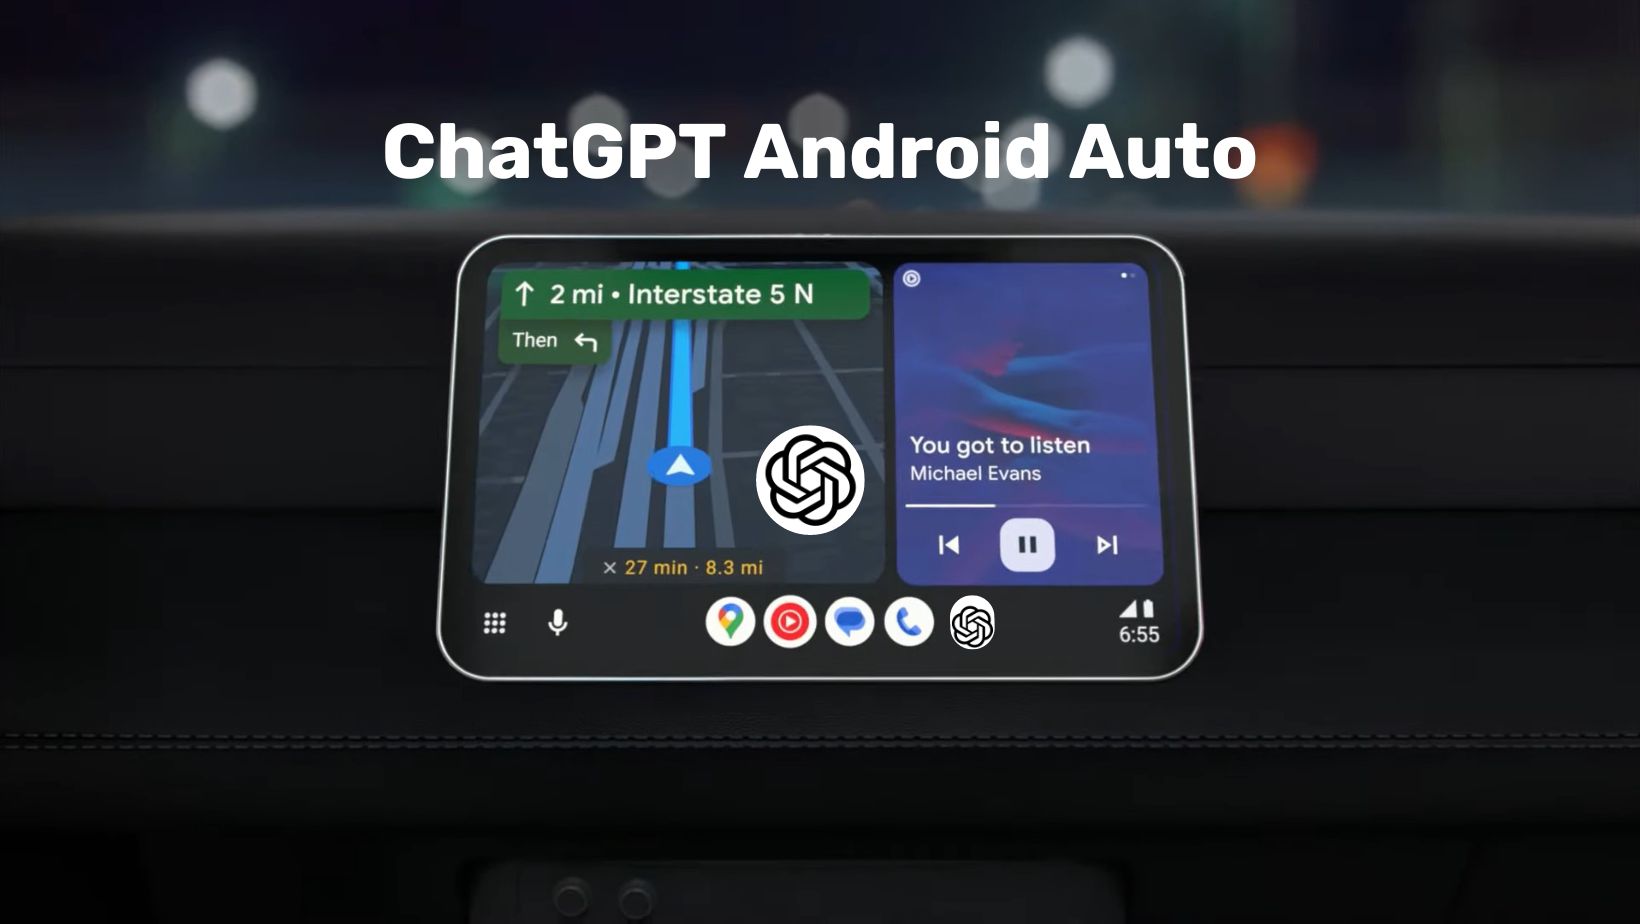 AI Assistants Could Come to Cars with Android Auto including ChatGPT and Google Gemini